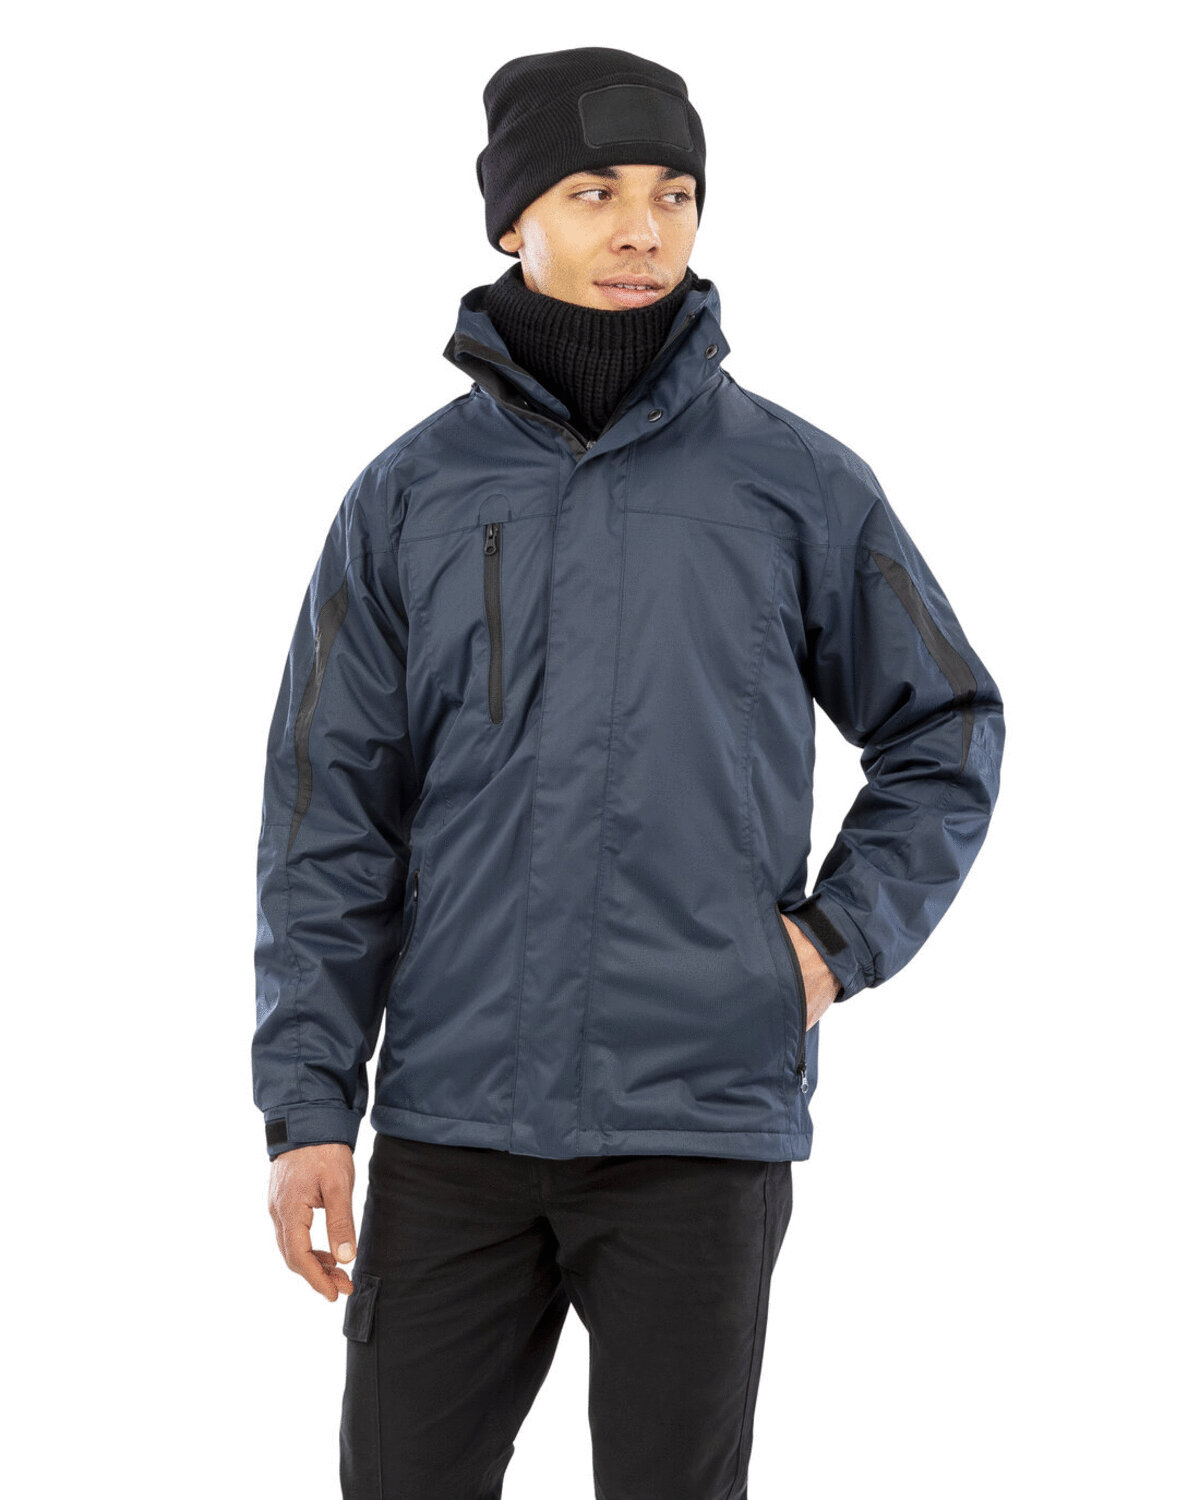 RS400M-MENS 3 IN1 JOURNEY JACKET WITH SOFTSHELL INNER